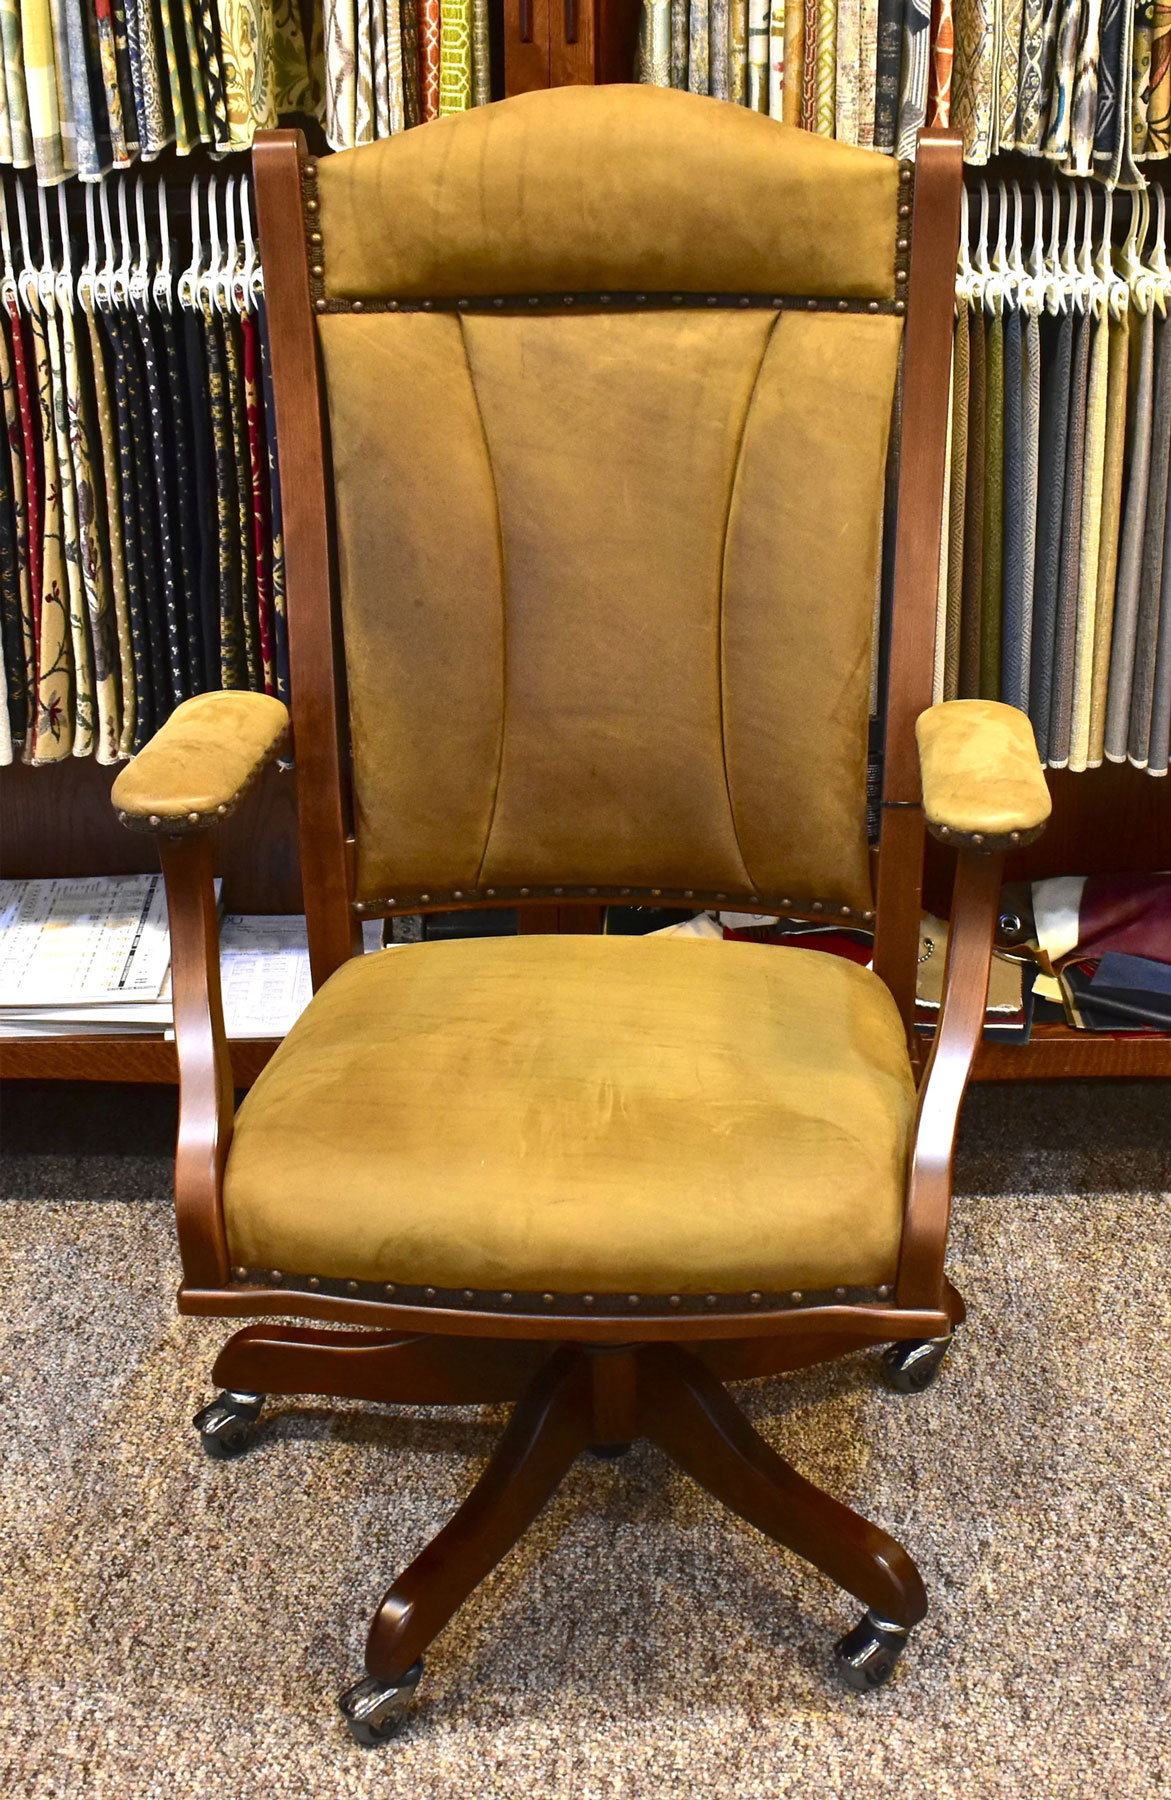 DC-55 Office Desk Chair in Rustic Cherry with Dejavu Prairie Dust Leather